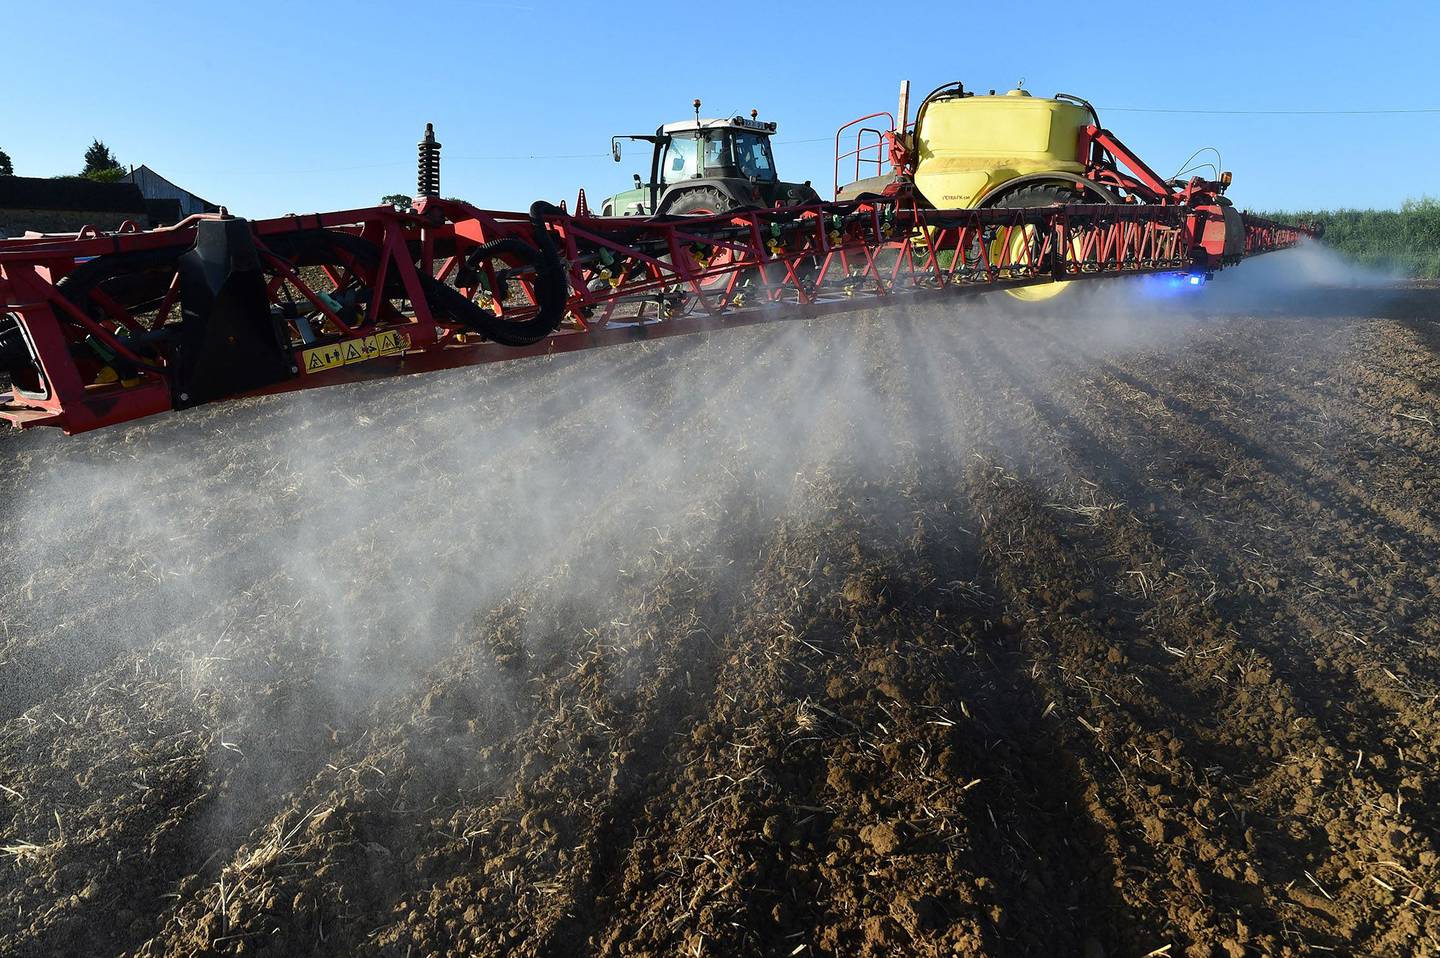 A glyphosate ban in Mexico would affect between 30% to 40% of the production of around 64 agricultural crops, estimates the Mexican Ministry of Agriculture